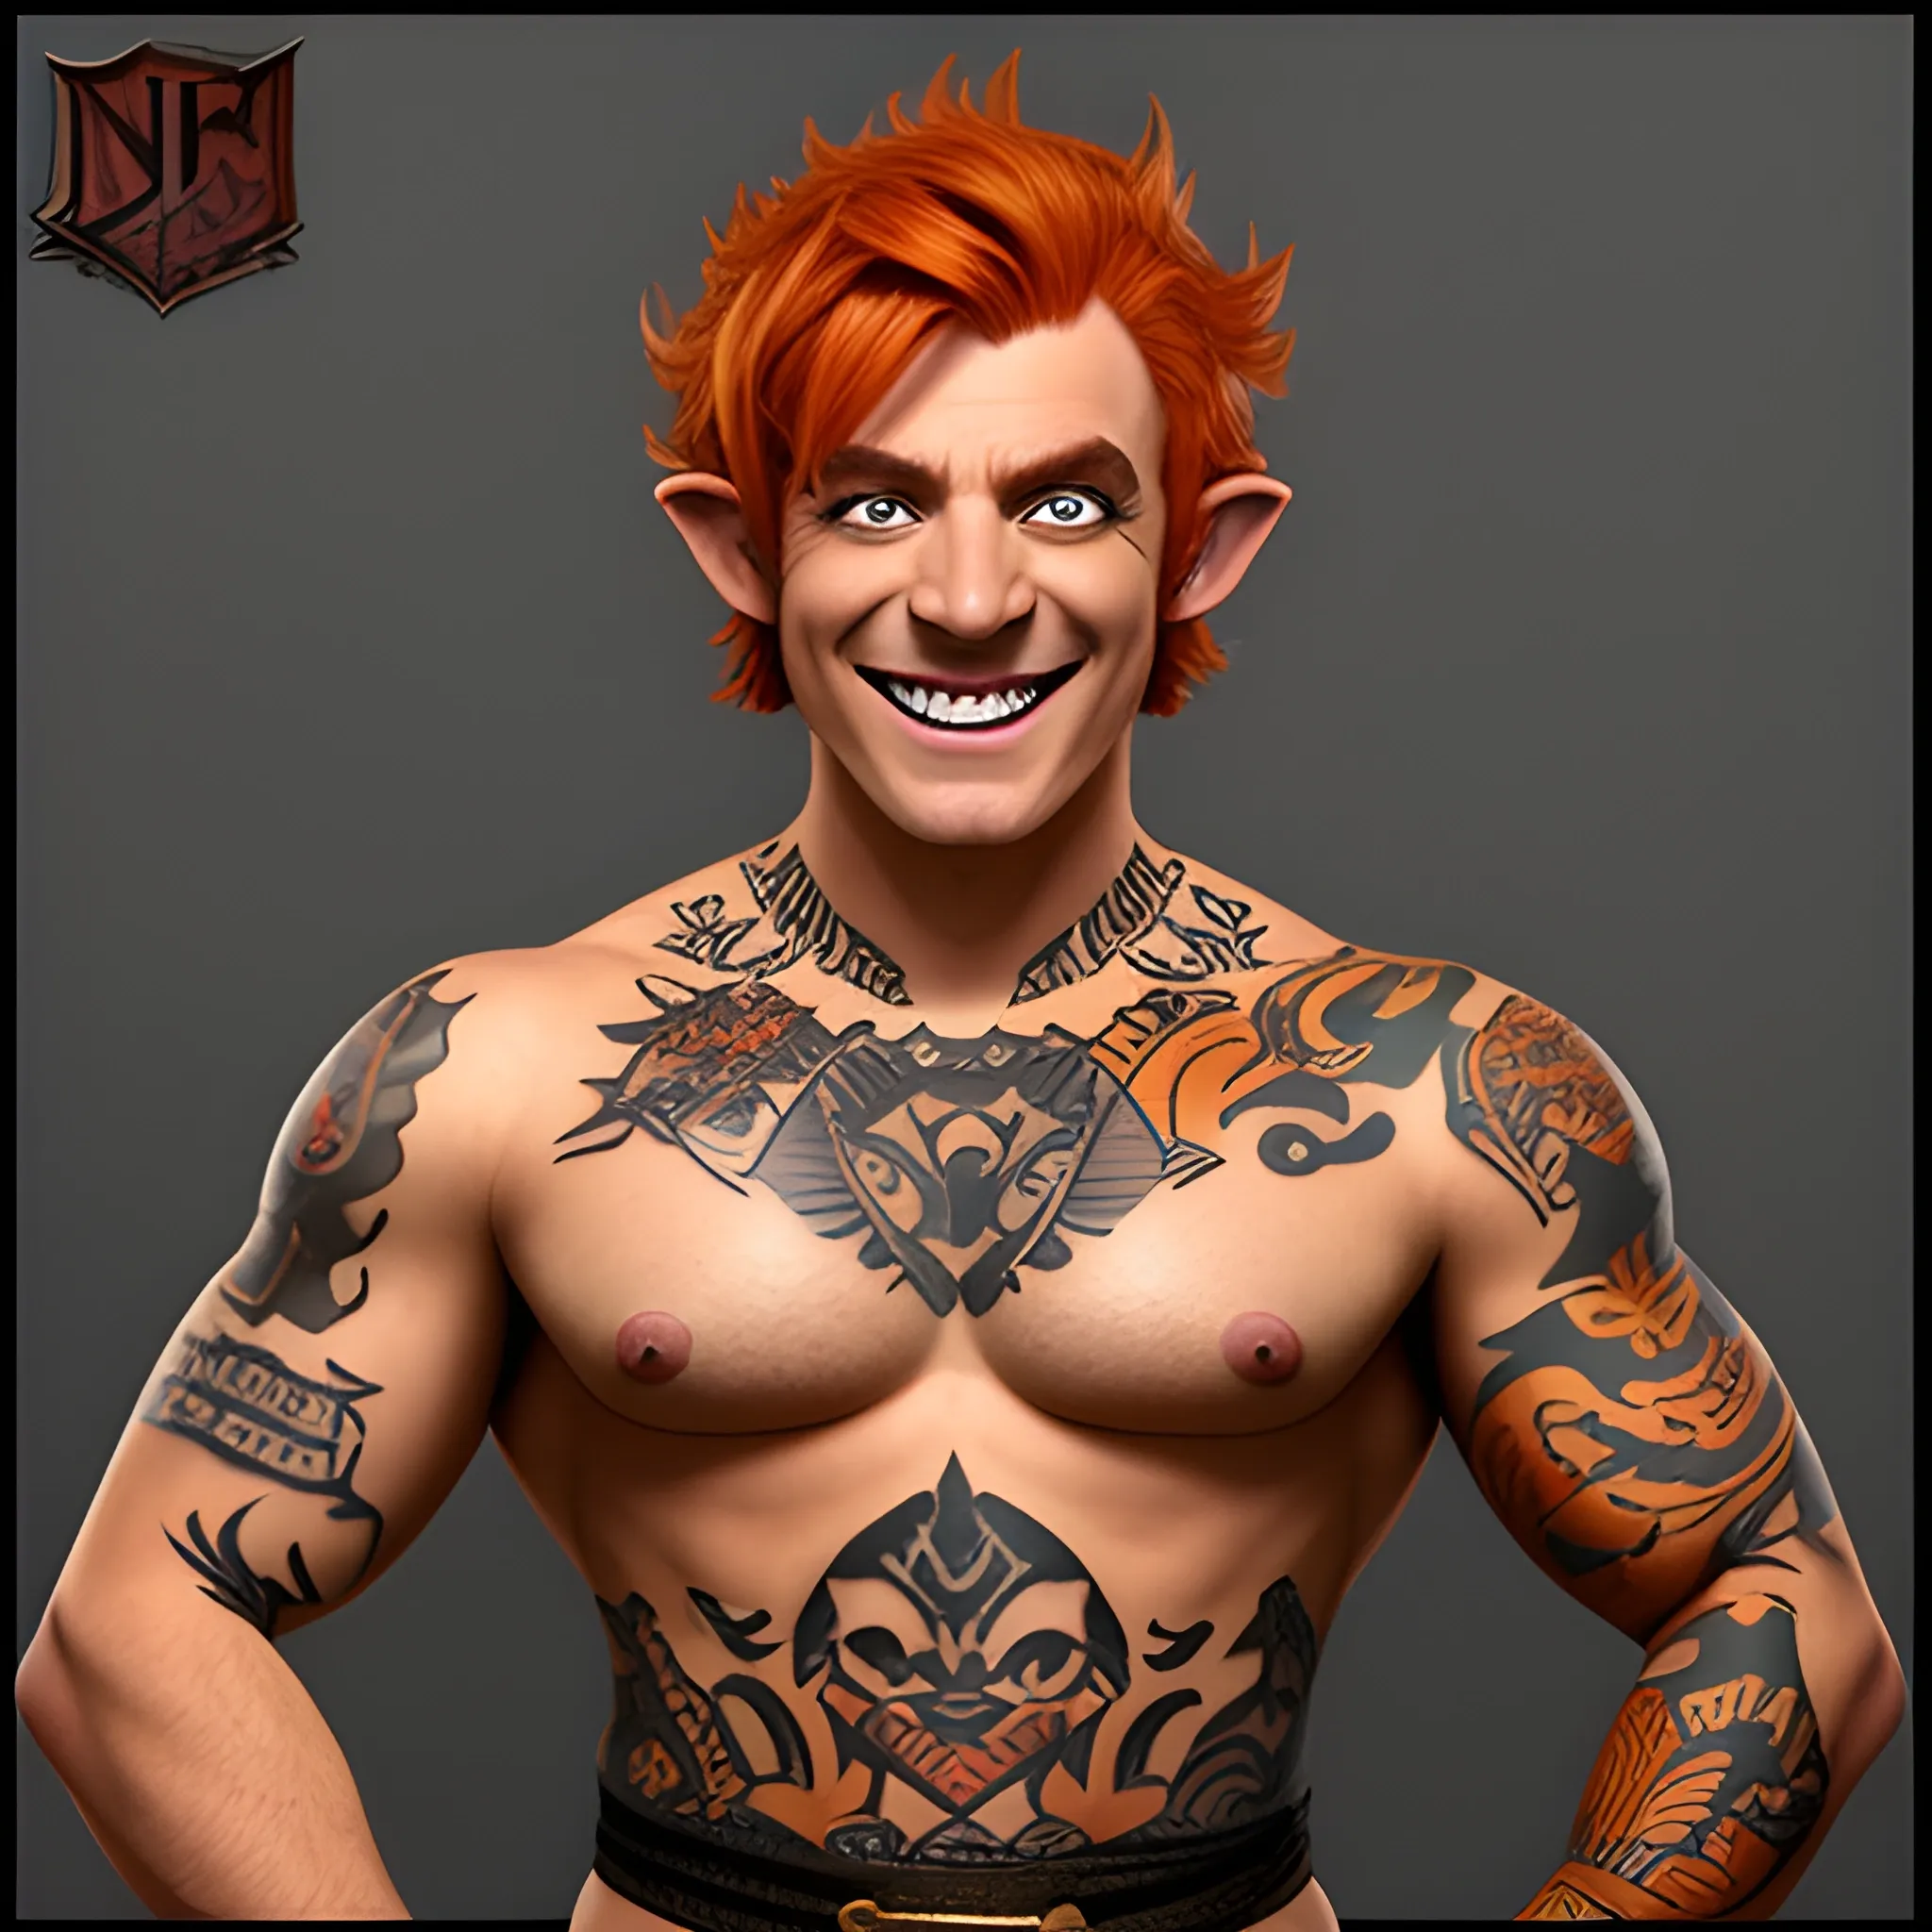 DnD  weak young baby face halfling male short haired halfling dark orange ginger with a tattoo smiling with a mugshot expression and playing a small drum 